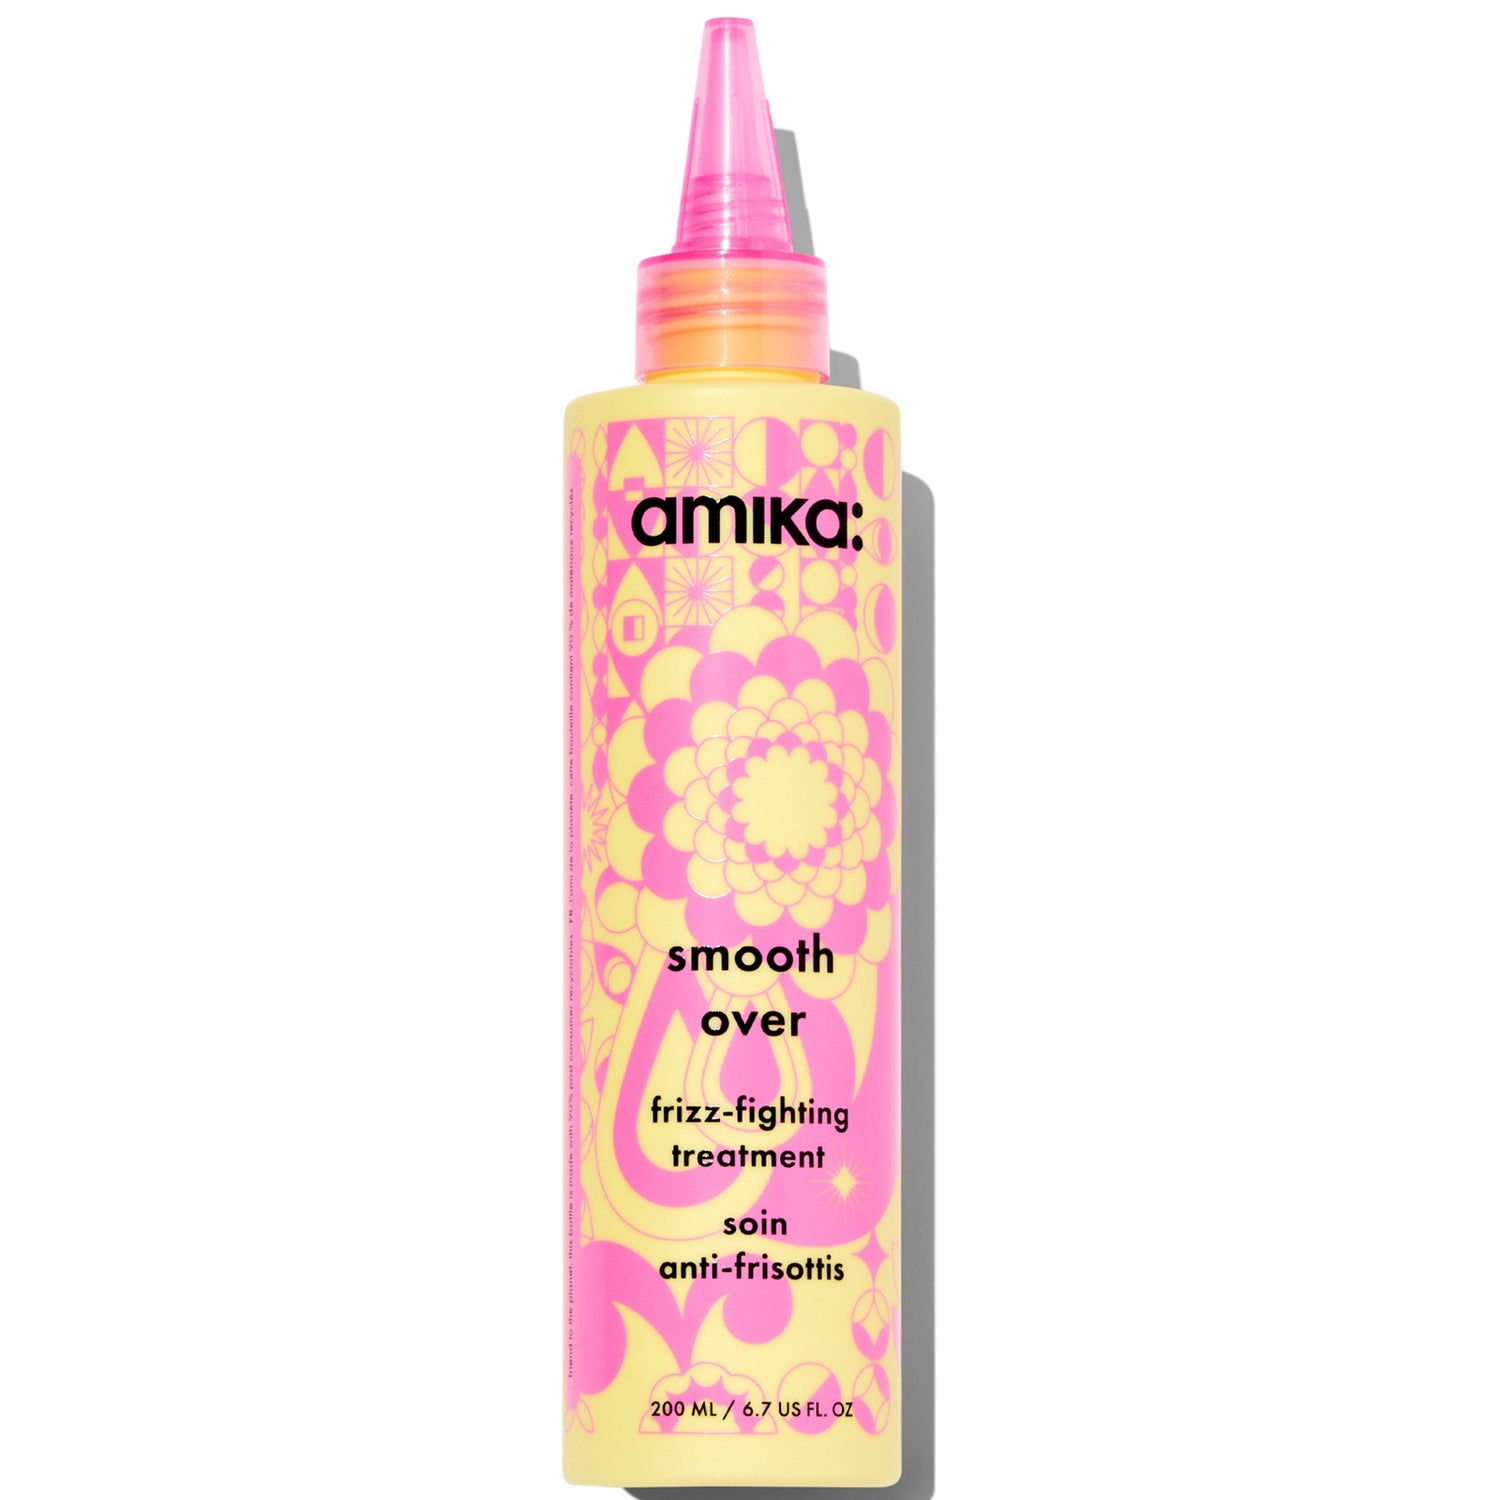 Amika Smooth Over Frizz-Fighting Treatment Mask 200ml